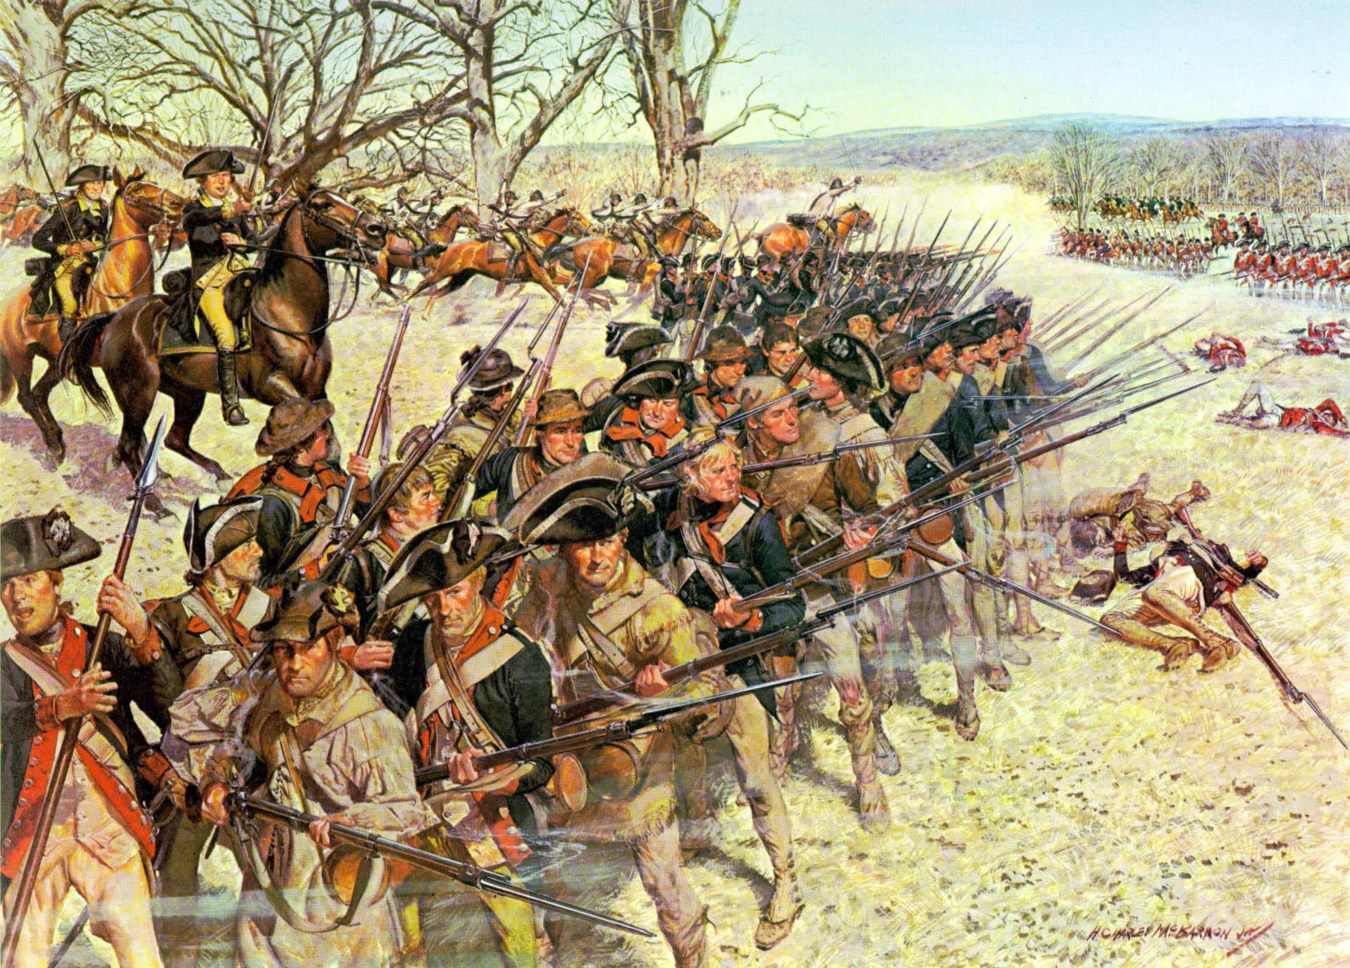 Battle of Guilford Courthouse, 15 March, 1781